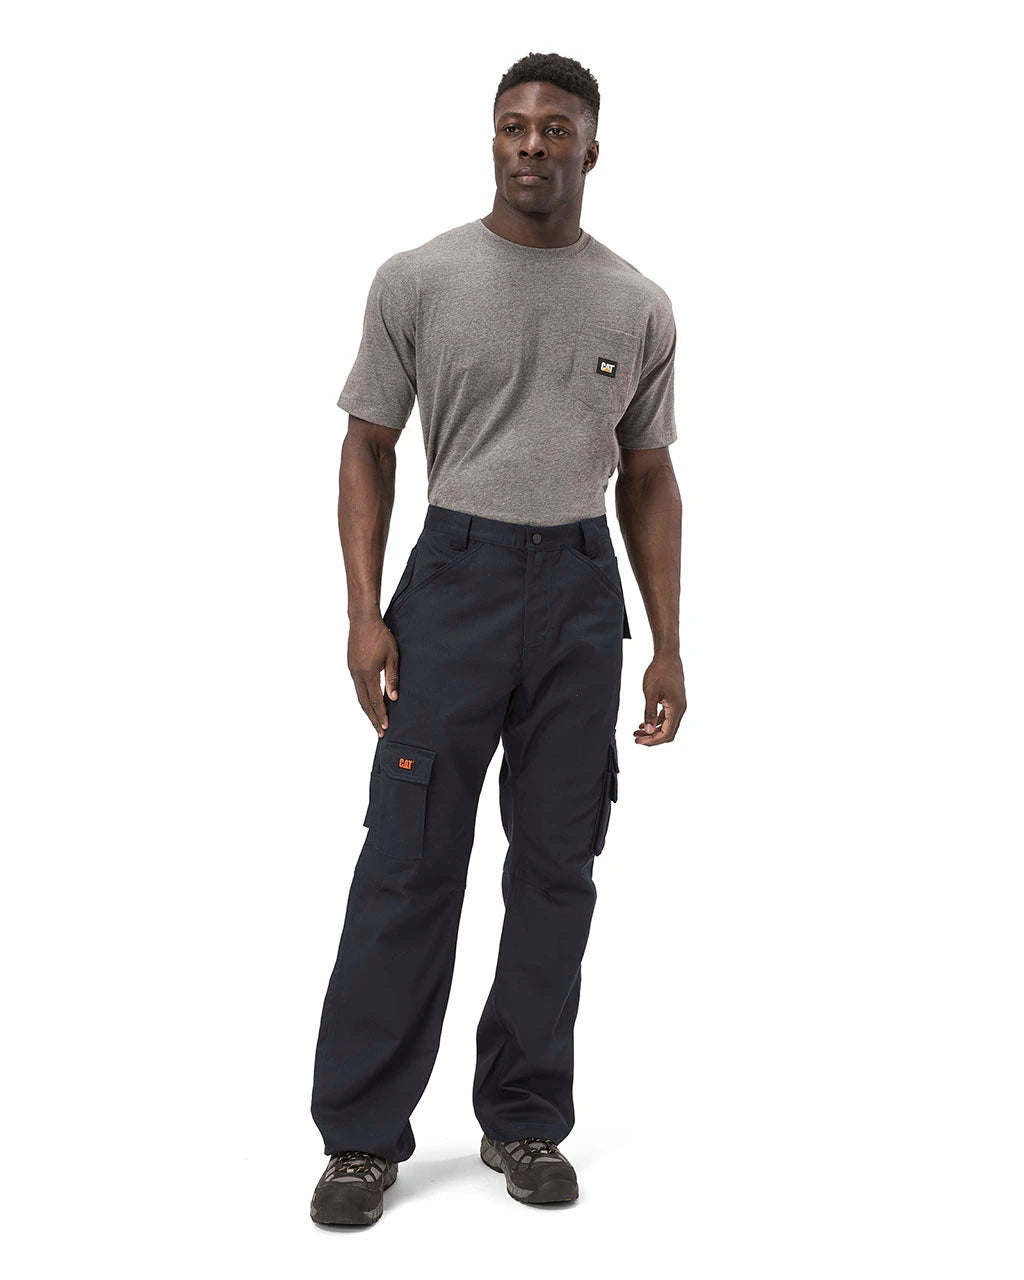 Straight Oxford Cargo Pants | Old Navy